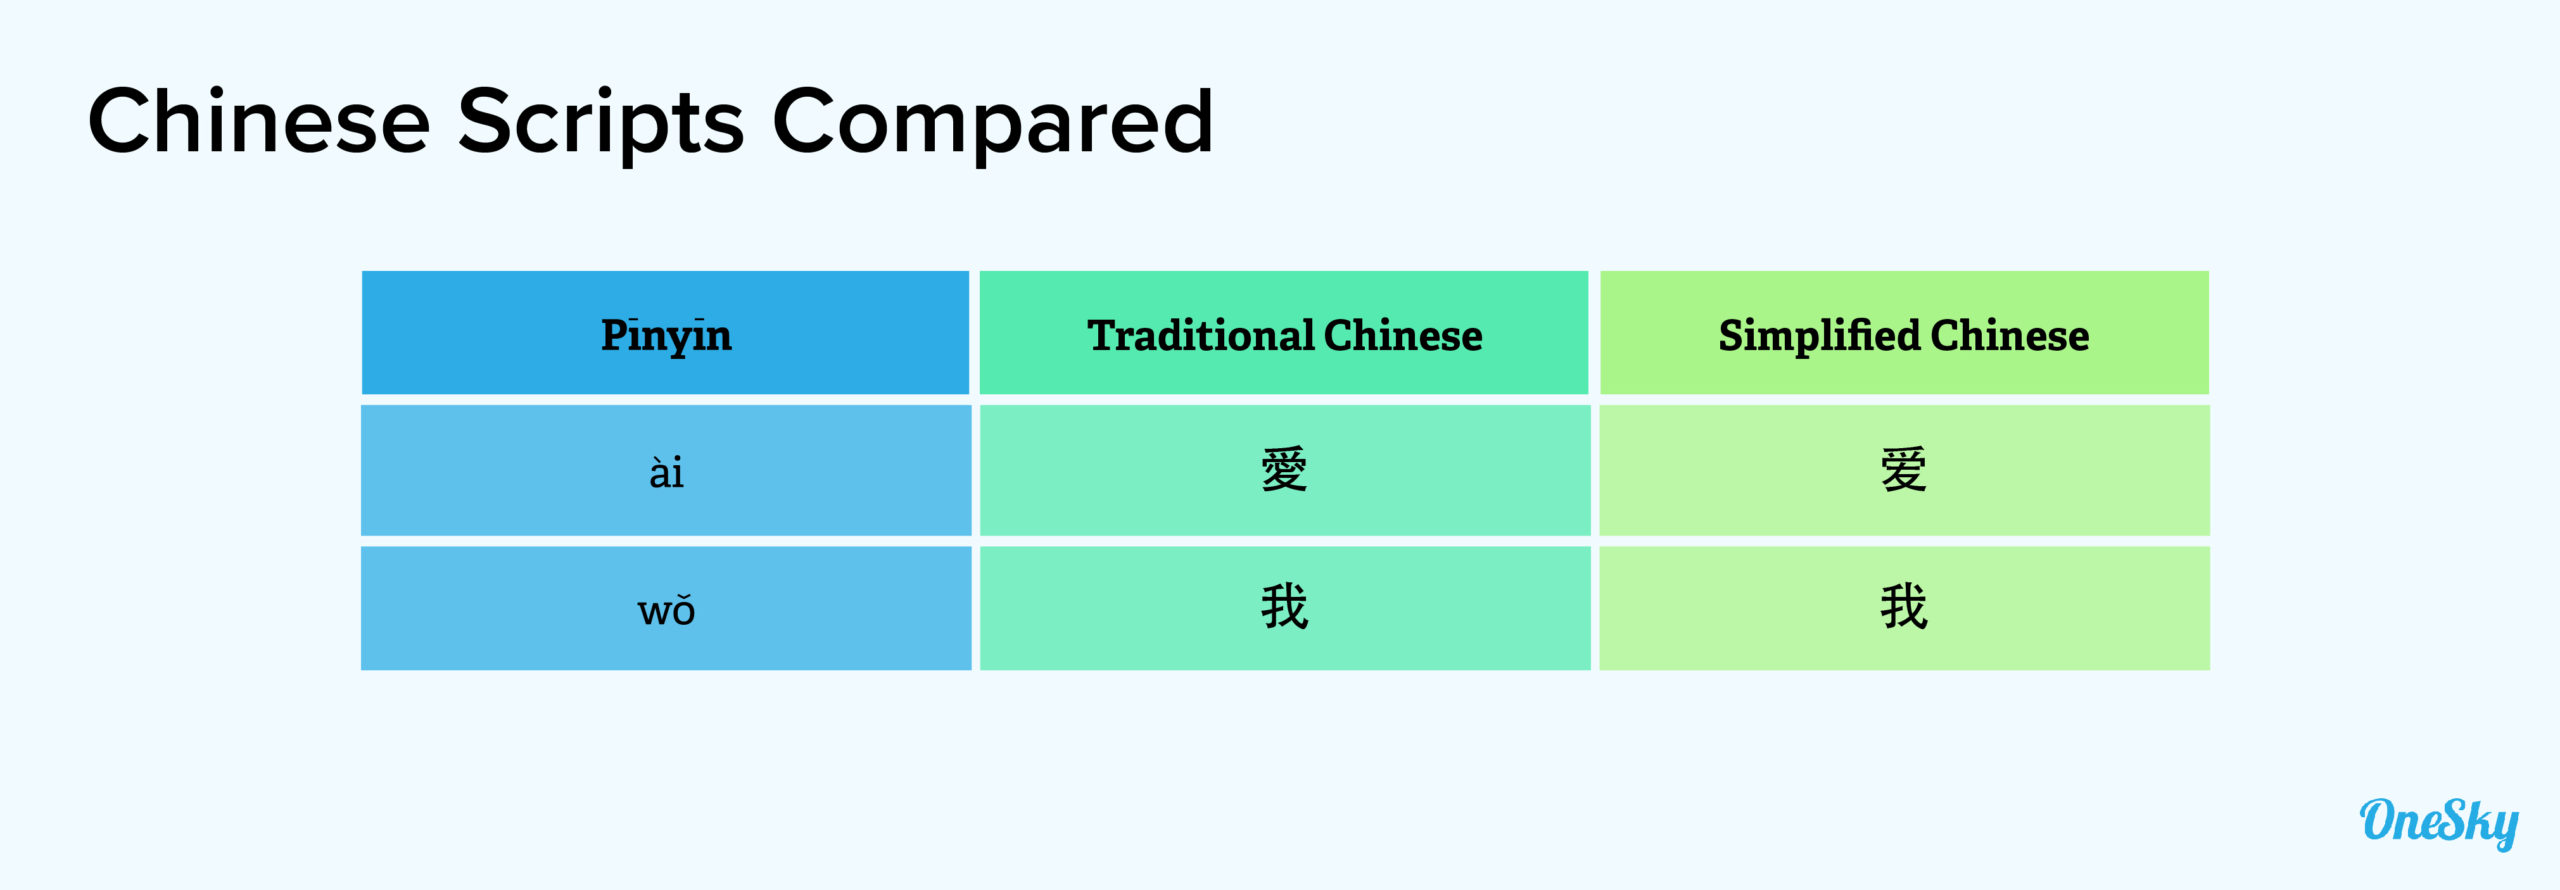 Know Your Scripts: Traditional Chinese vs. Simplified Chinese